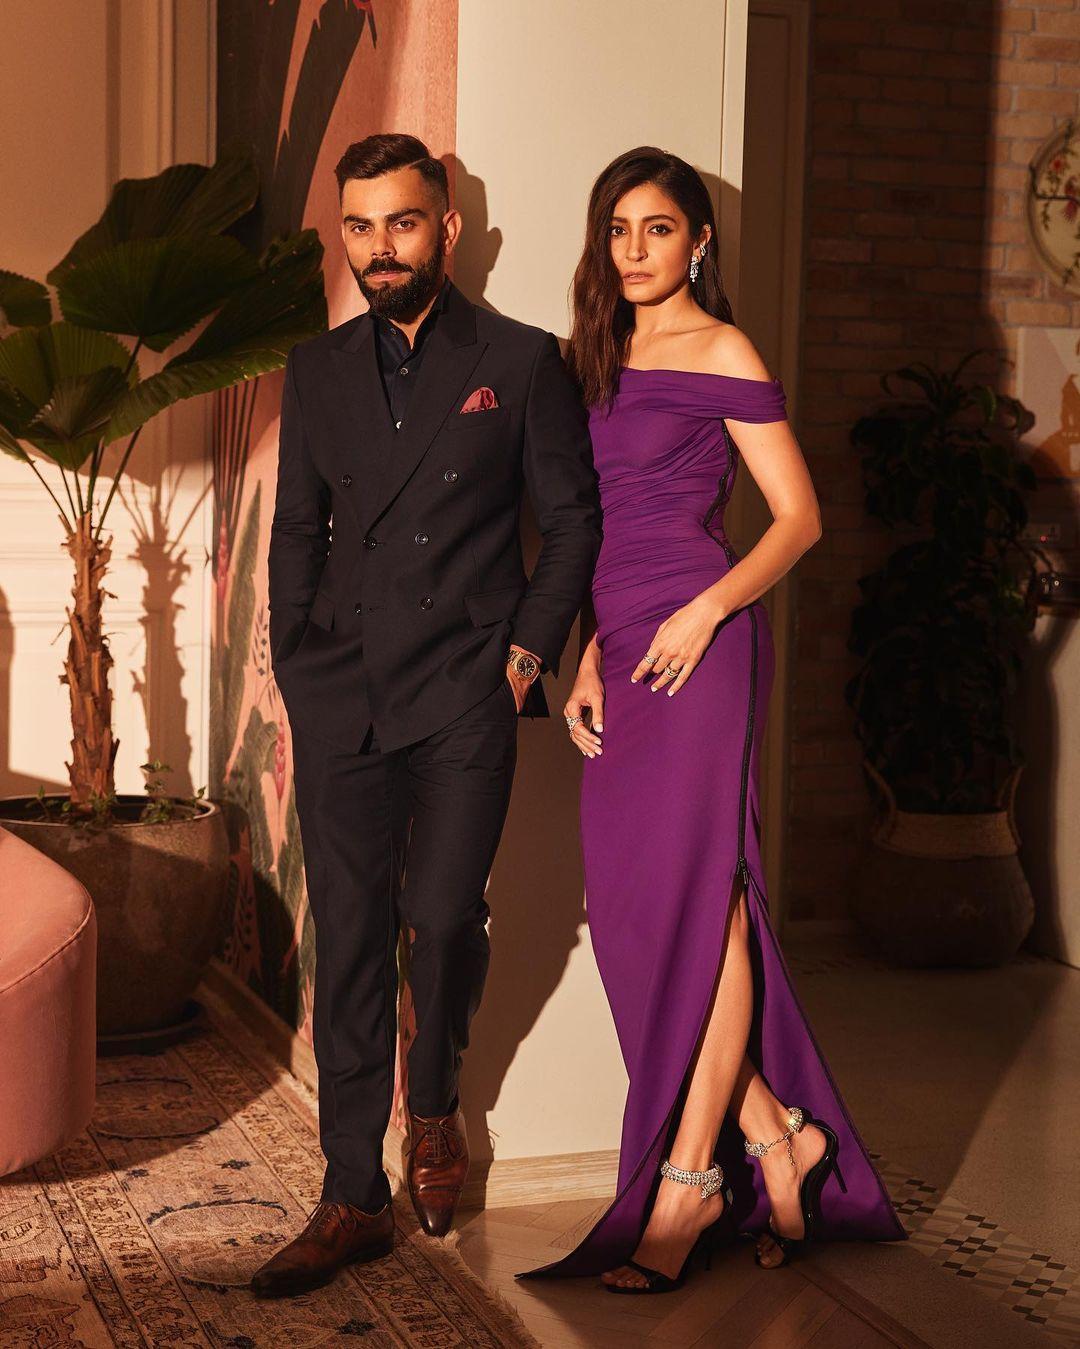 For this look, Anushka wore a stunning off-shoulder, body-hugging purple dress, while Virat slayed in a black three-piece suit